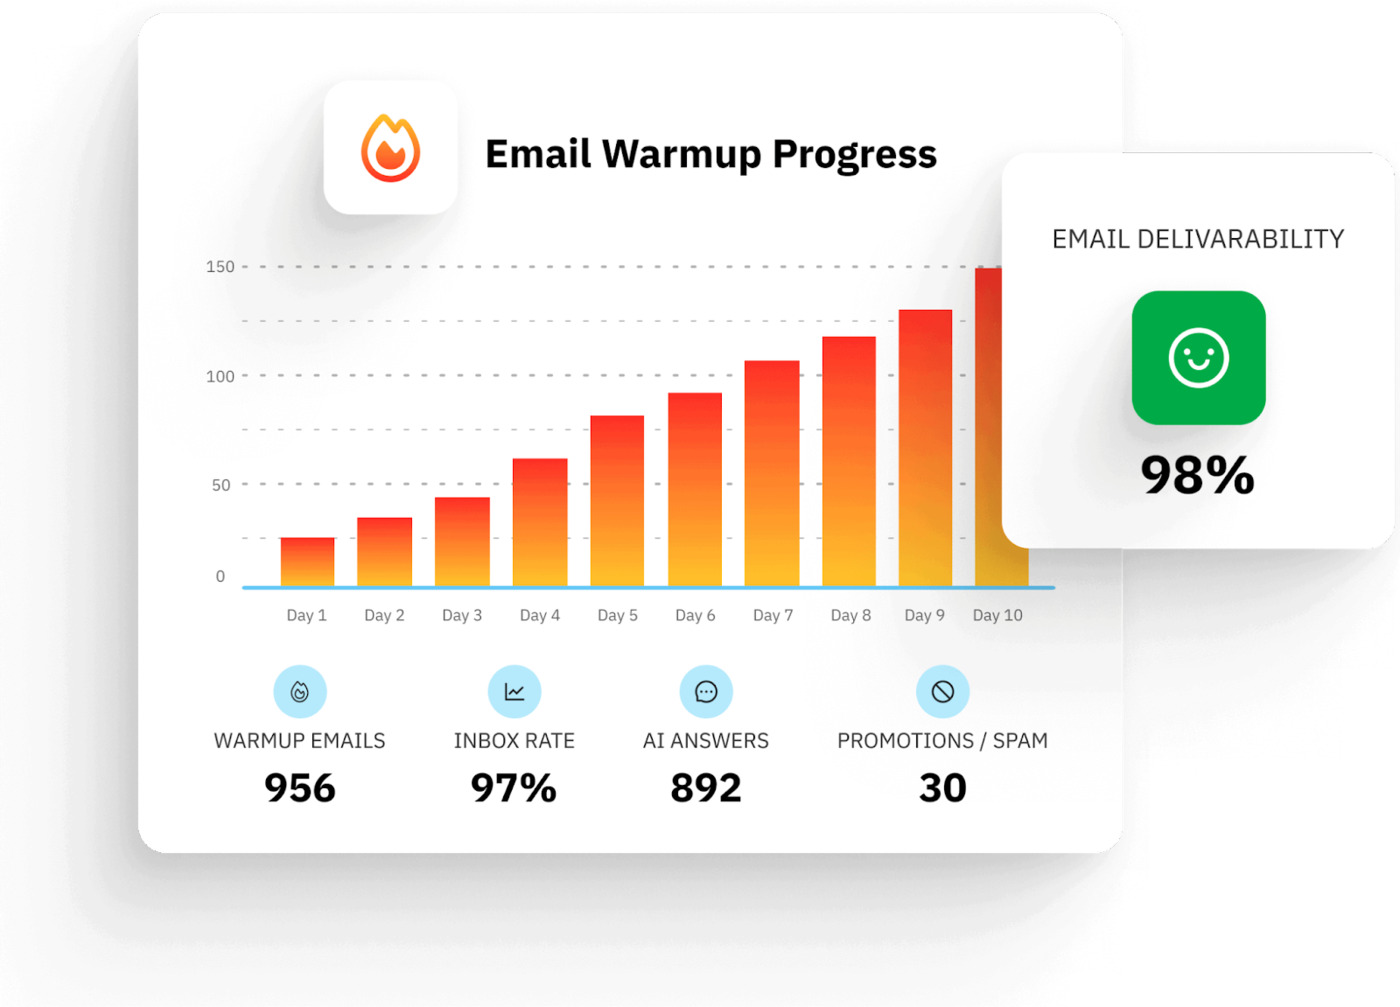 The AI-powered cold email outreach software is packed with dynamic features, including personalization, automatic follow-ups, and more, to help companies scale up campaigns and generate more revenue.